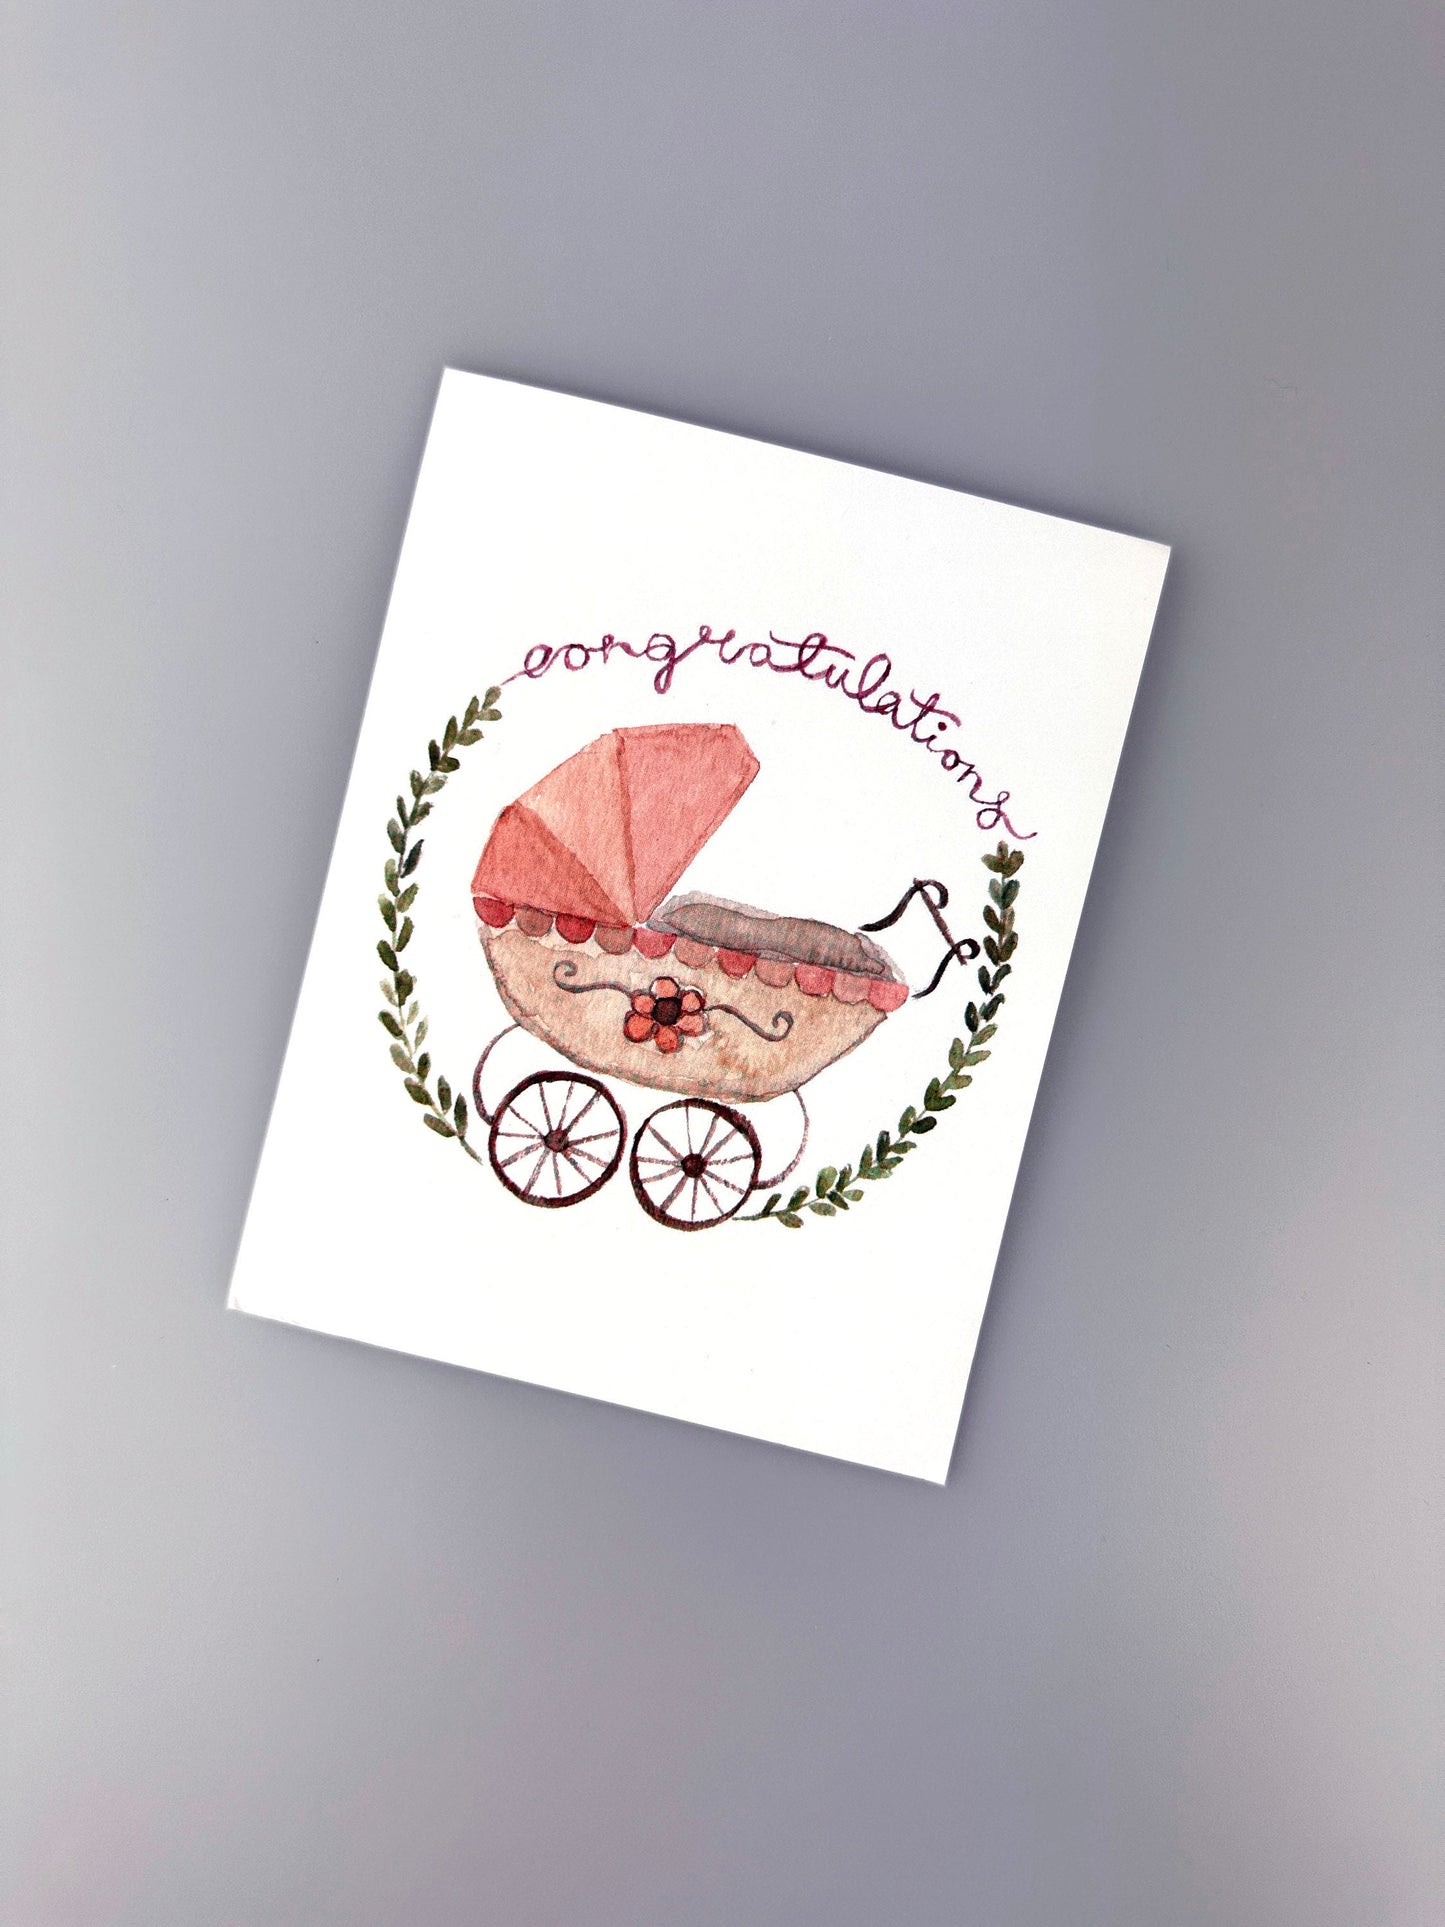 New Baby Card - Baby Shower Card - Baby Congratulations - Baby Girl - Vintage Baby Stroller